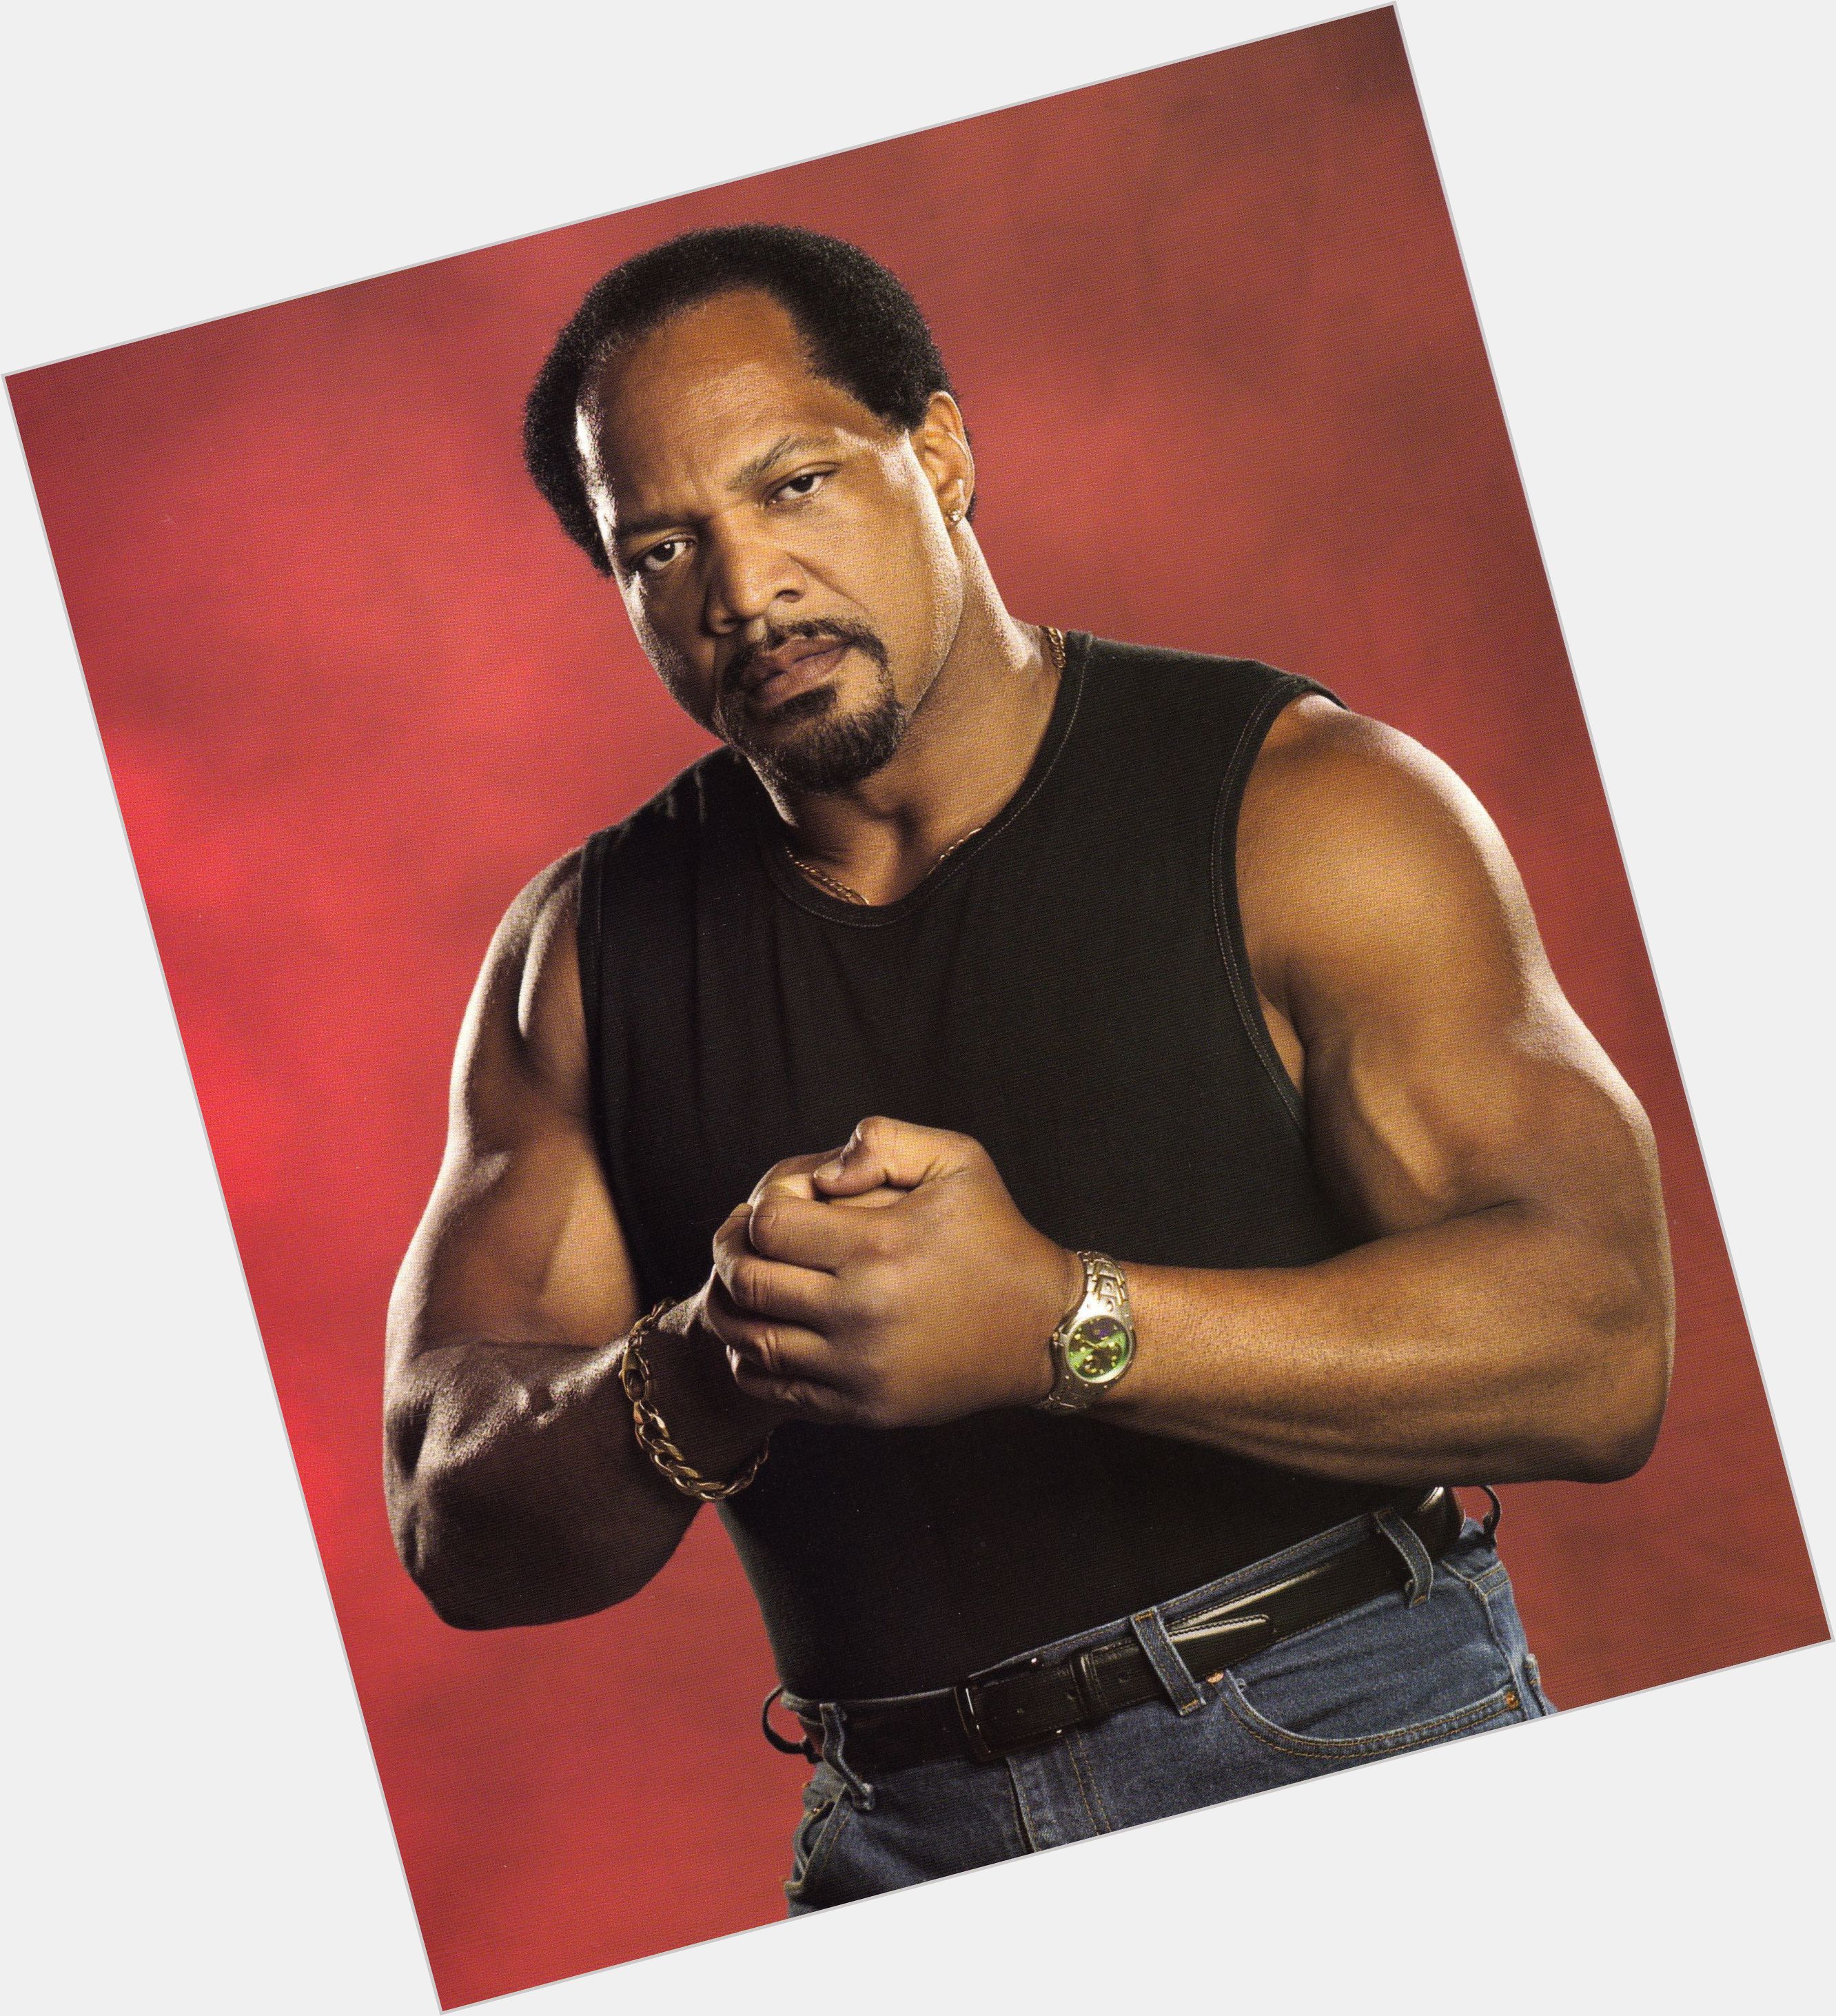 Https://fanpagepress.net/m/R/Ron Simmons Dating 2